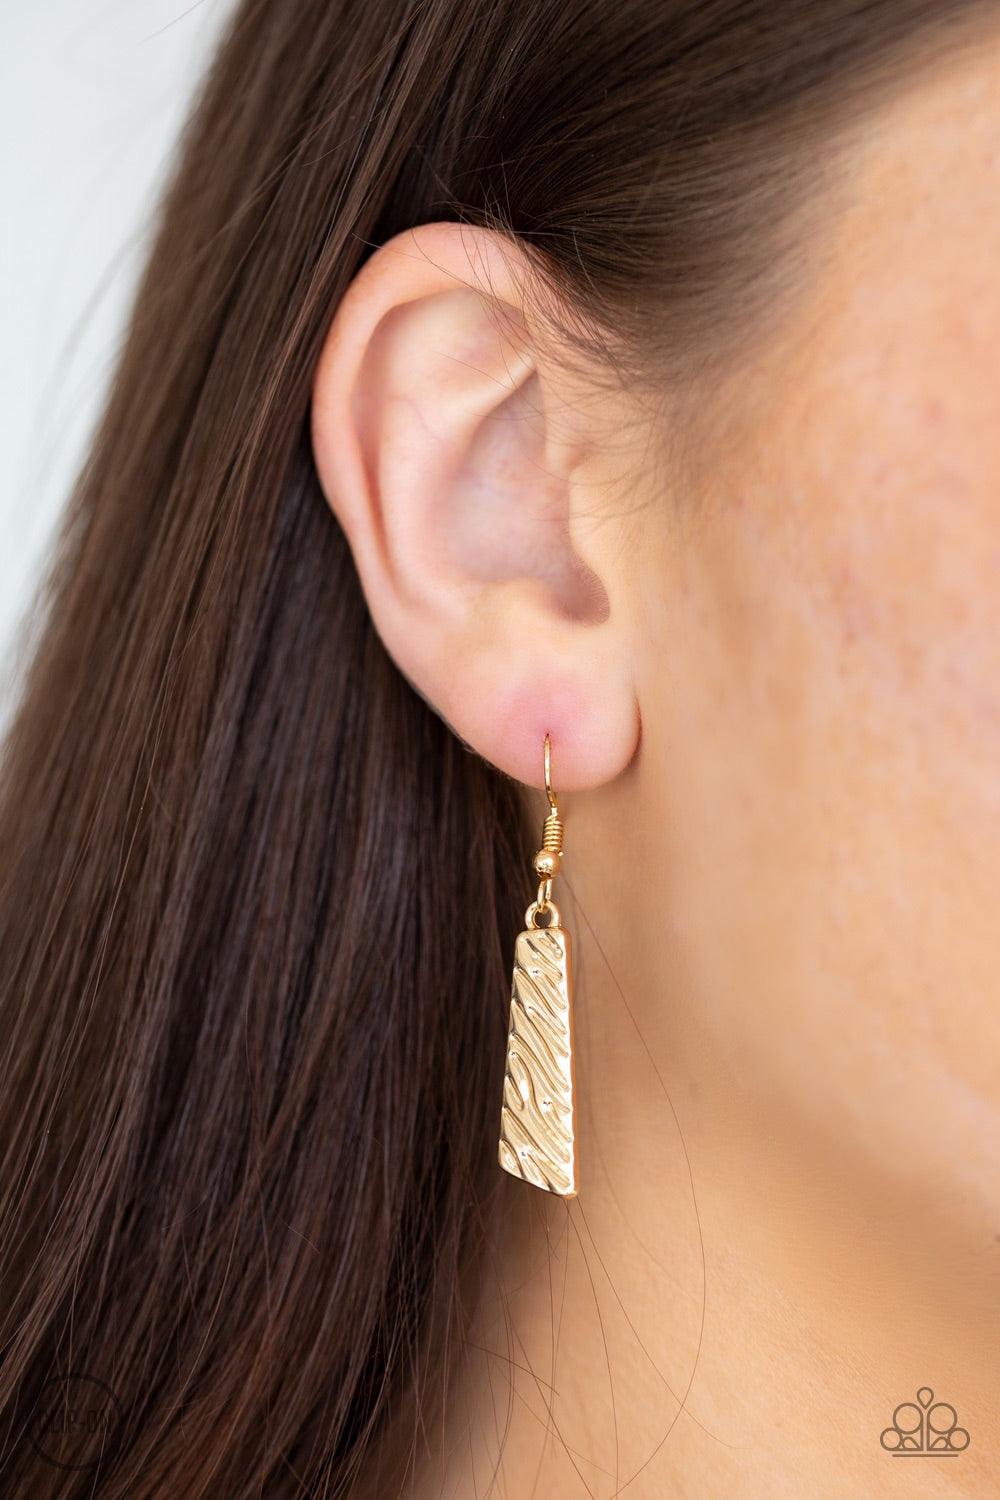 Paparazzi Accessories Texture Tigress - Gold Embossed in rippling patterns, a collection of angular gold plates swing from the bottom of a glistening gold chain, creating an edgy geometric fringe below the collar. Features an adjustable clasp closure. Jew